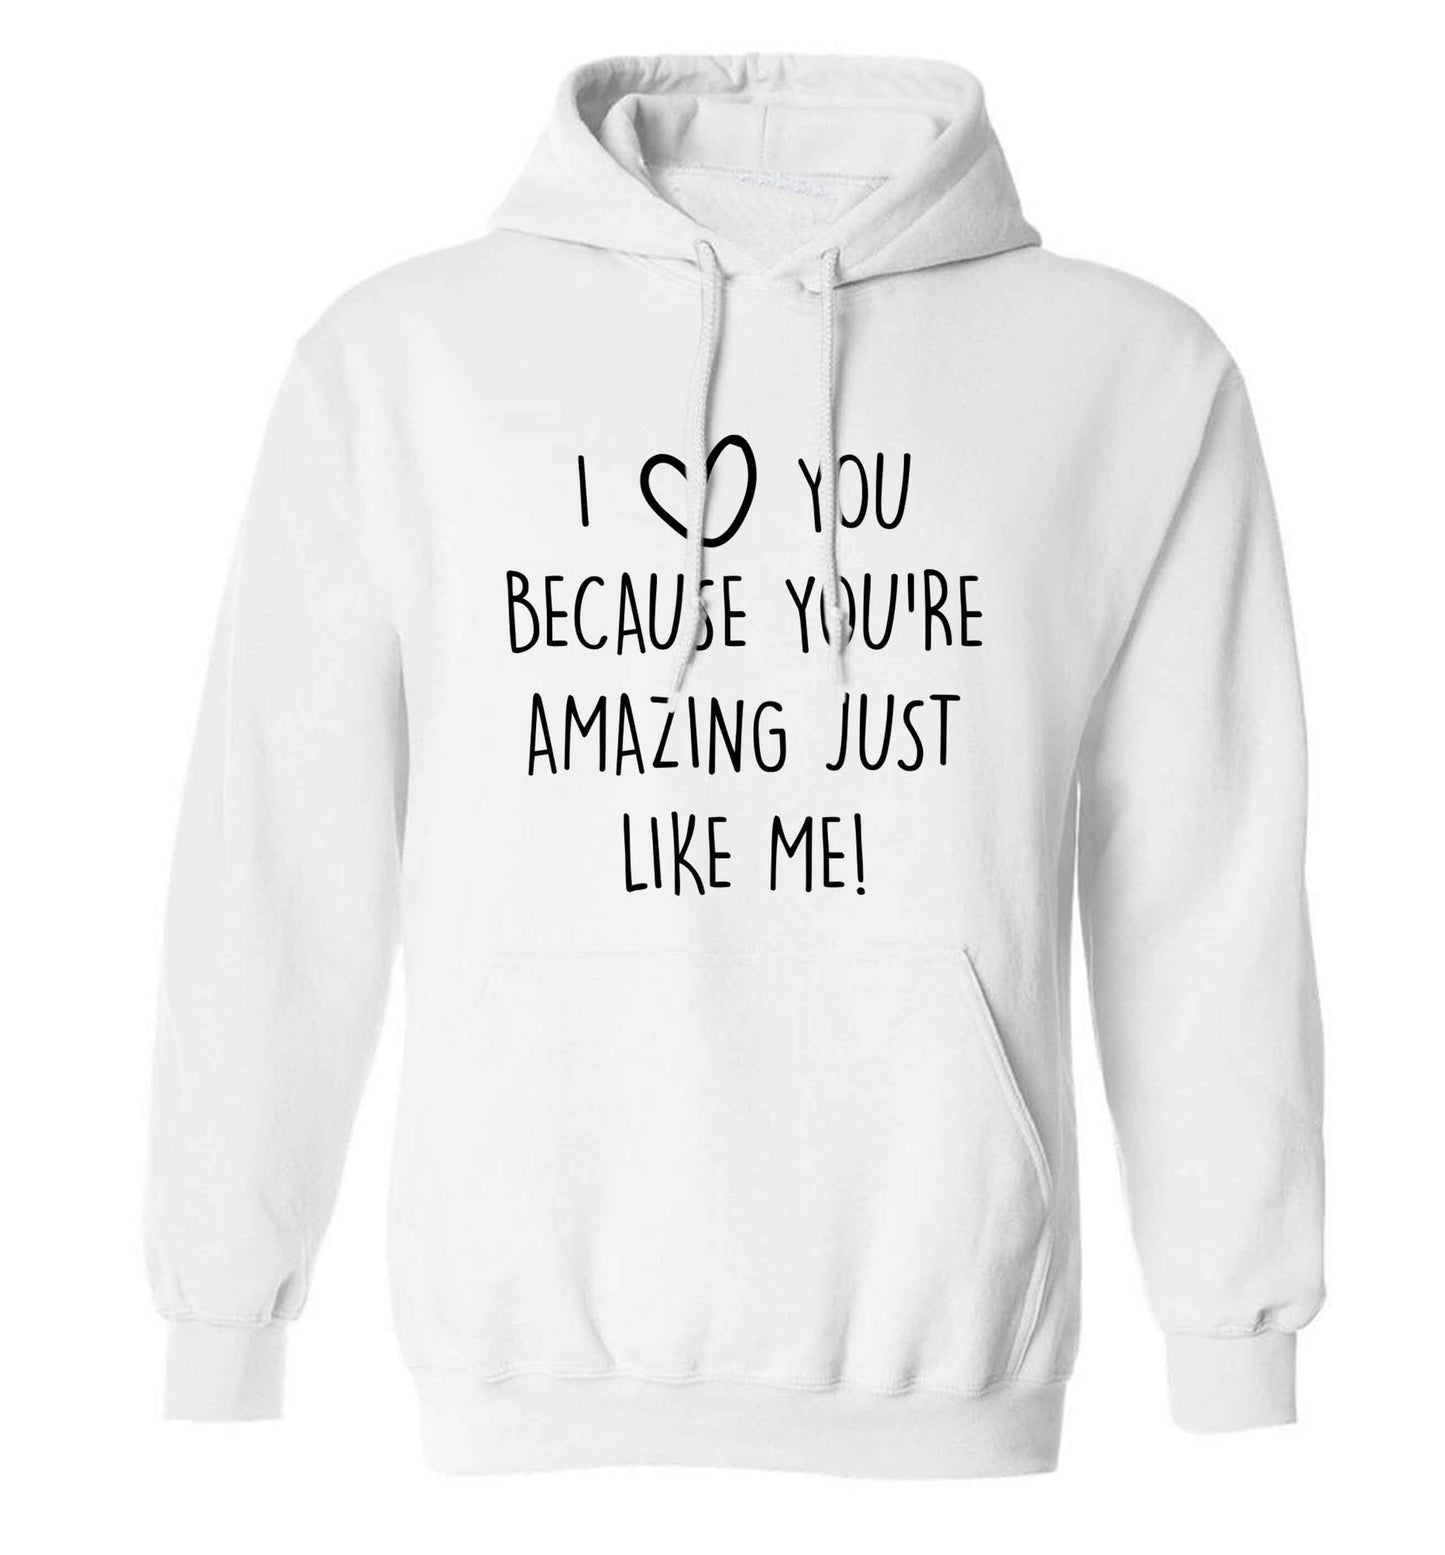 I love you because you're amazing just like me adults unisex white hoodie 2XL